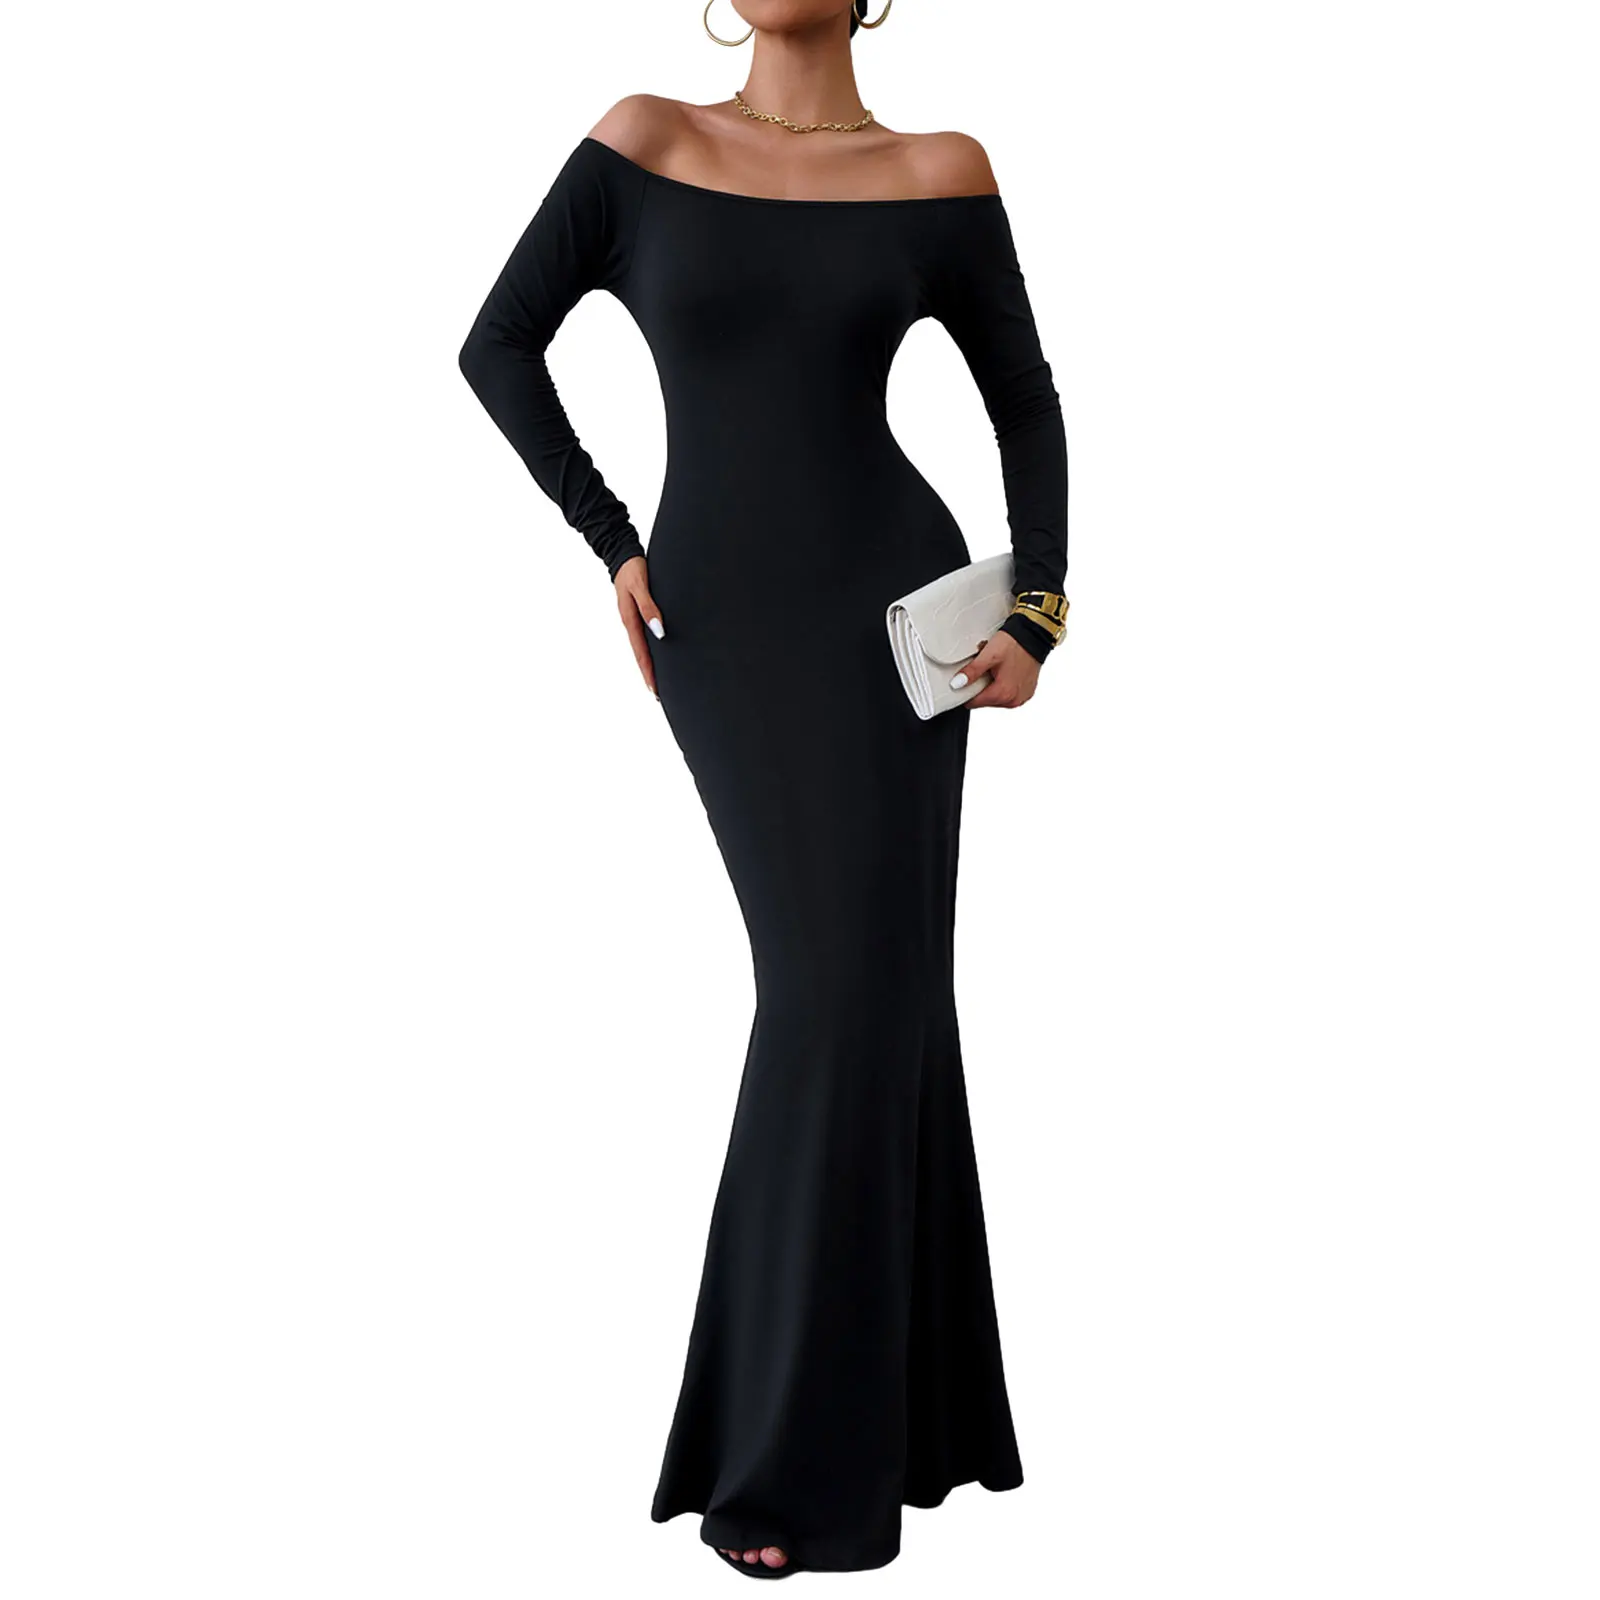 

Women Long Sleeve Elegent Long Dress Solid Color Long Sleeve Off-Shoulder Party Mermaid Dress for Beach Cocktail